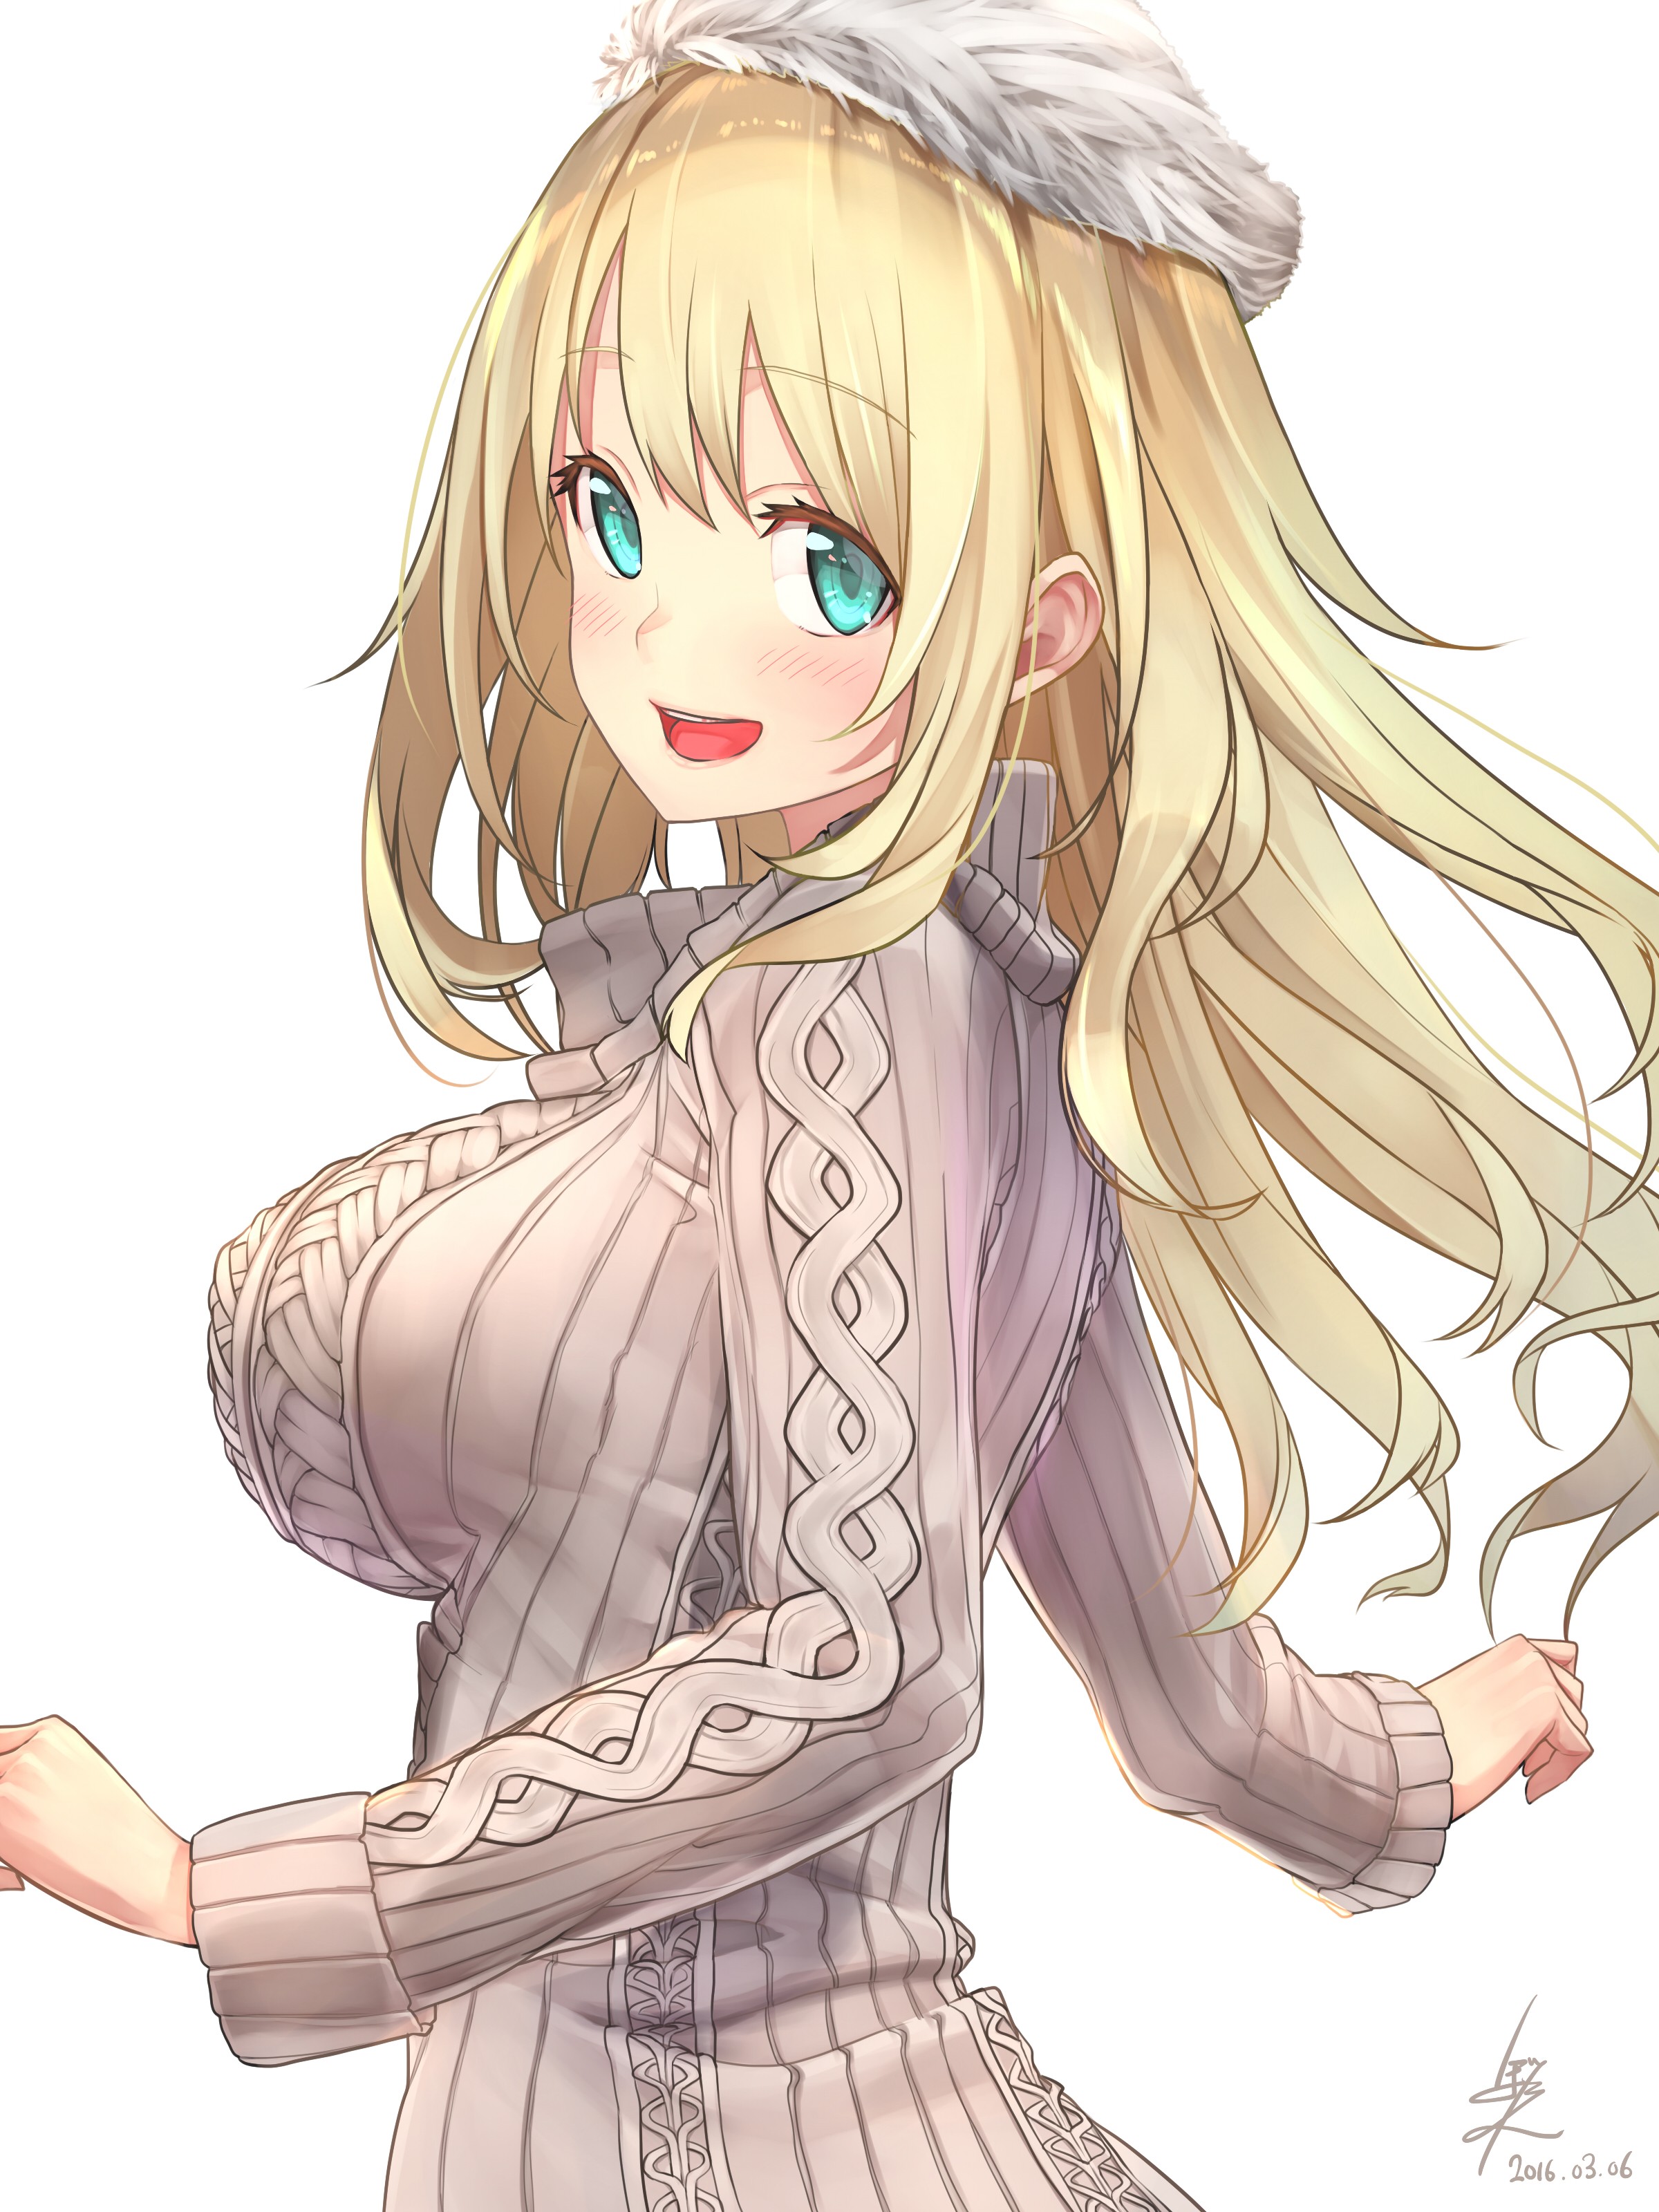 Anime 2400x3200 anime anime girls Kantai Collection Atago (KanColle) sweater blonde aqua eyes Baffu boobs big boobs huge breasts open mouth Pixiv white background simple background long hair curvy